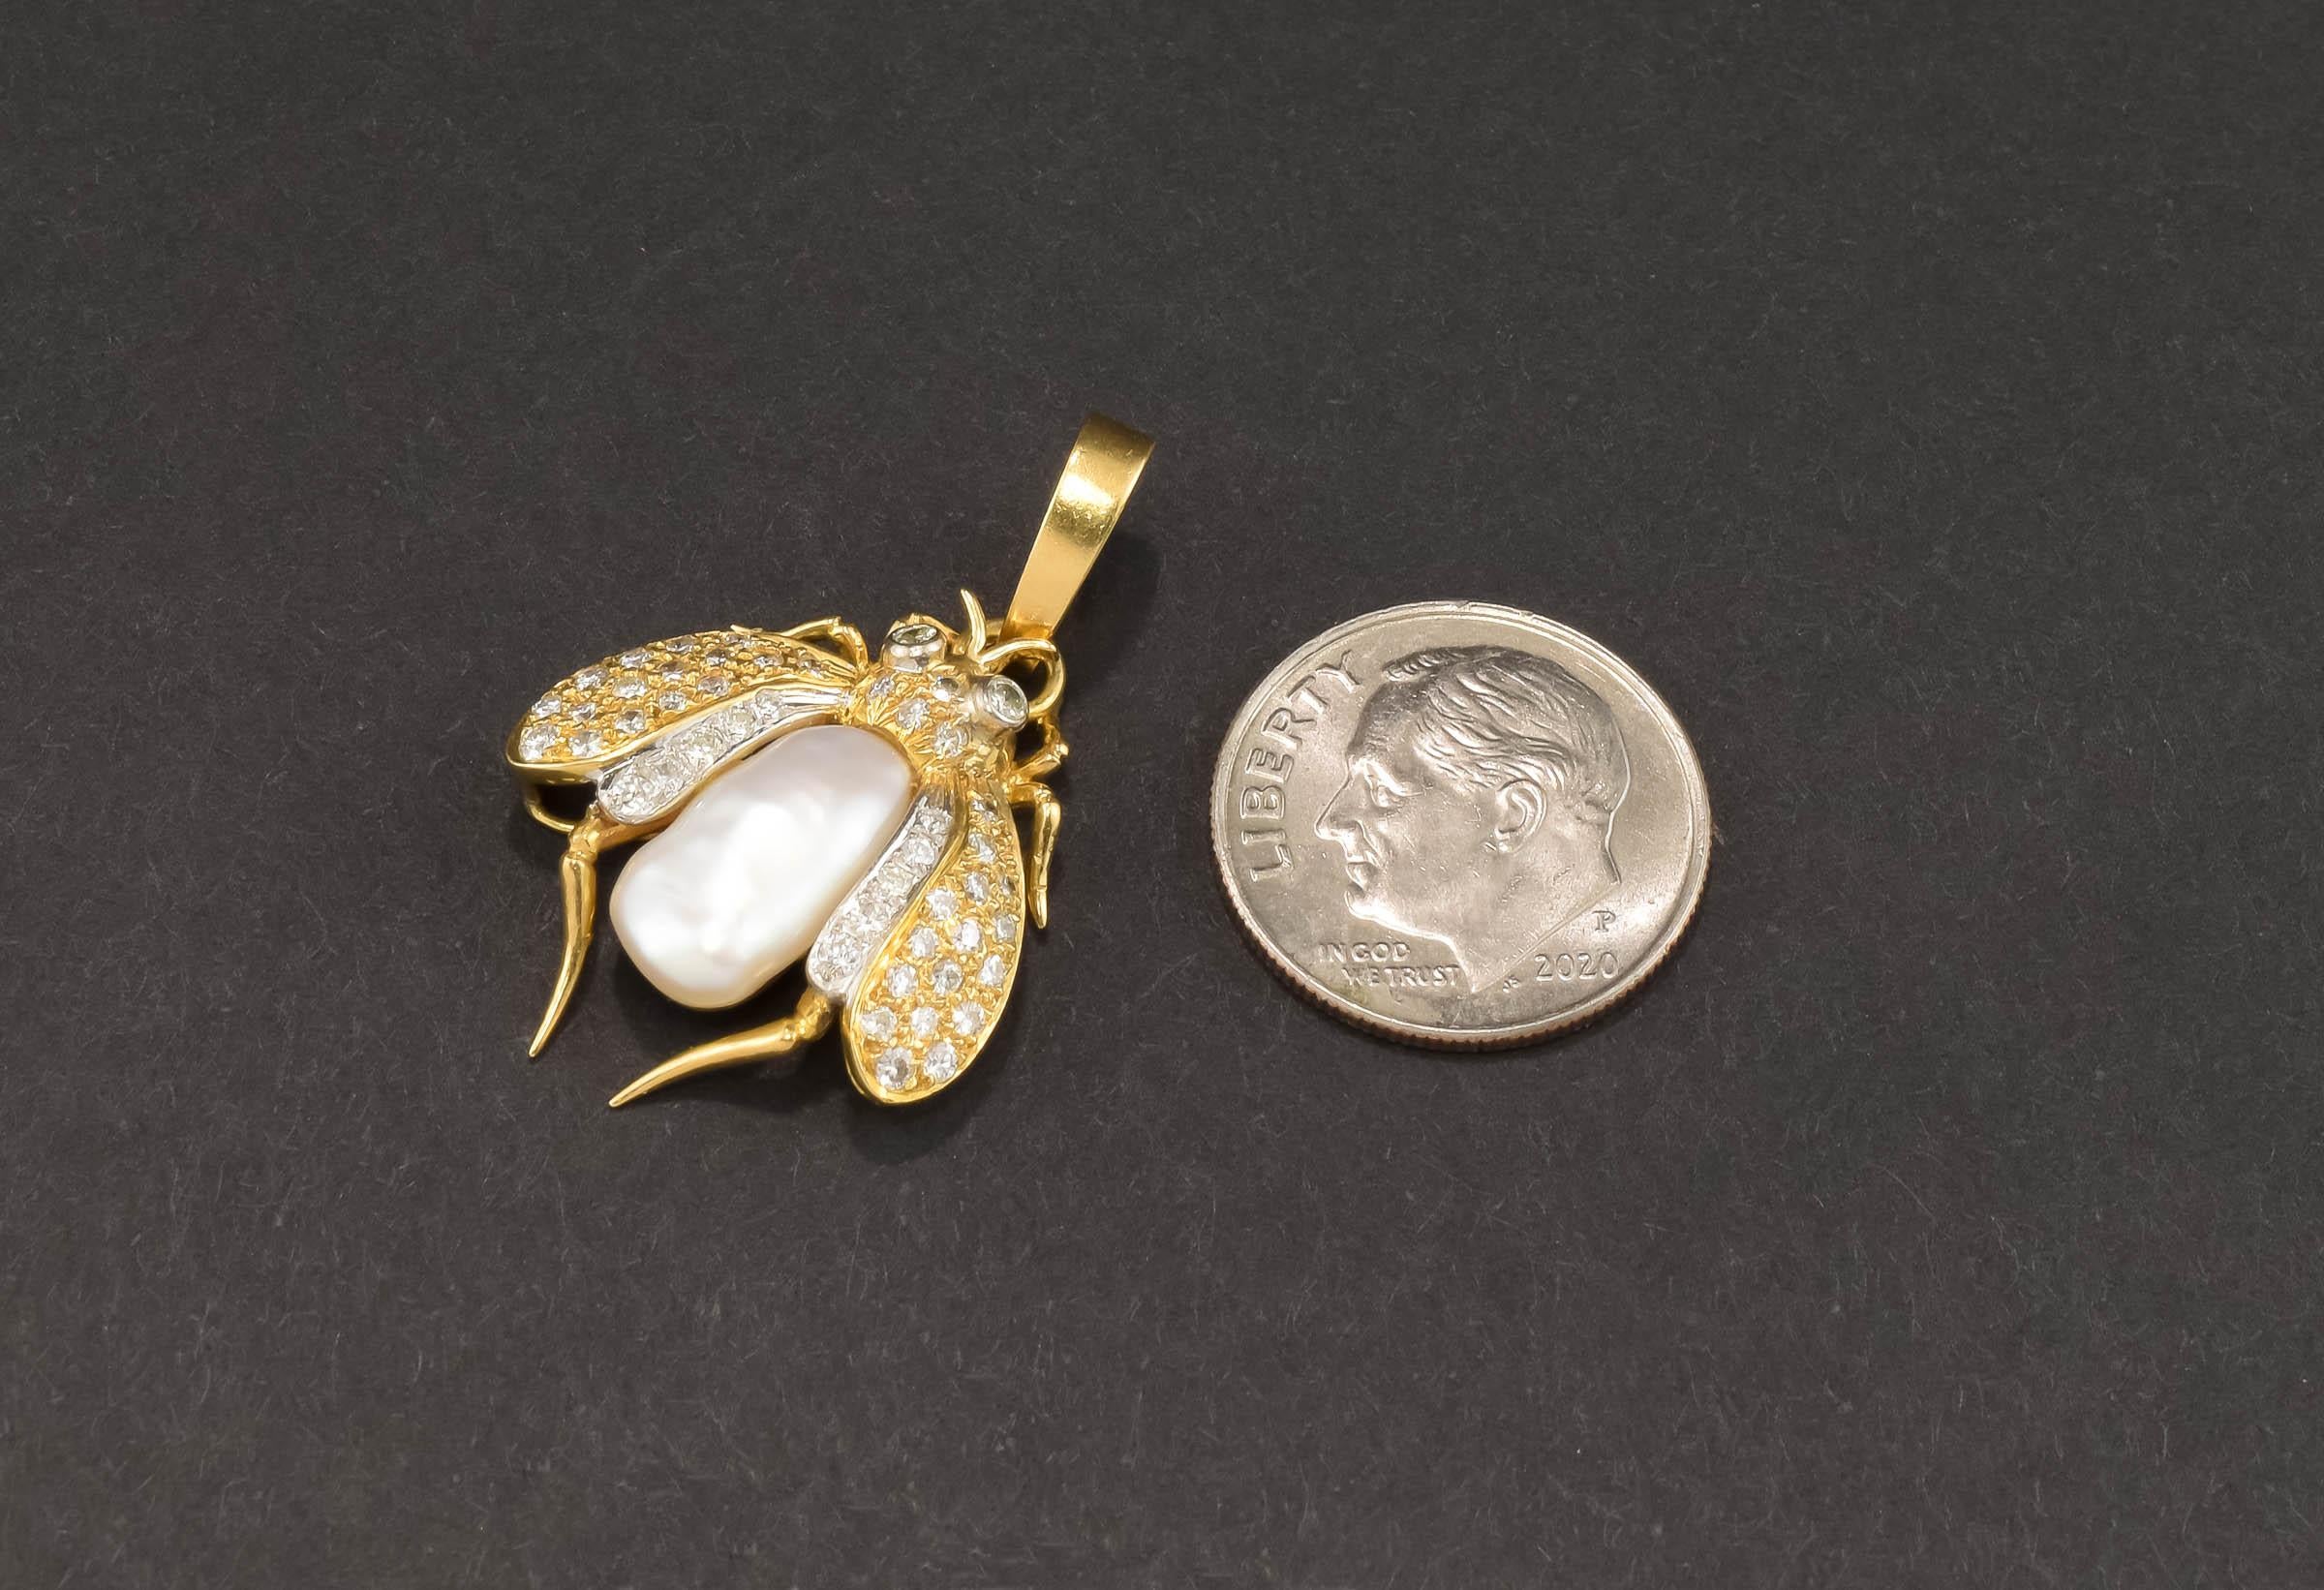 A fabulous and ultra sparkly gold and diamond Bee pendant with a great quality enhancer bail so you can add this Bee to nearly any chain or strand of pearls/gemstones.

Finely made of 14K gold, the Bee features 43 extremely fiery modern round